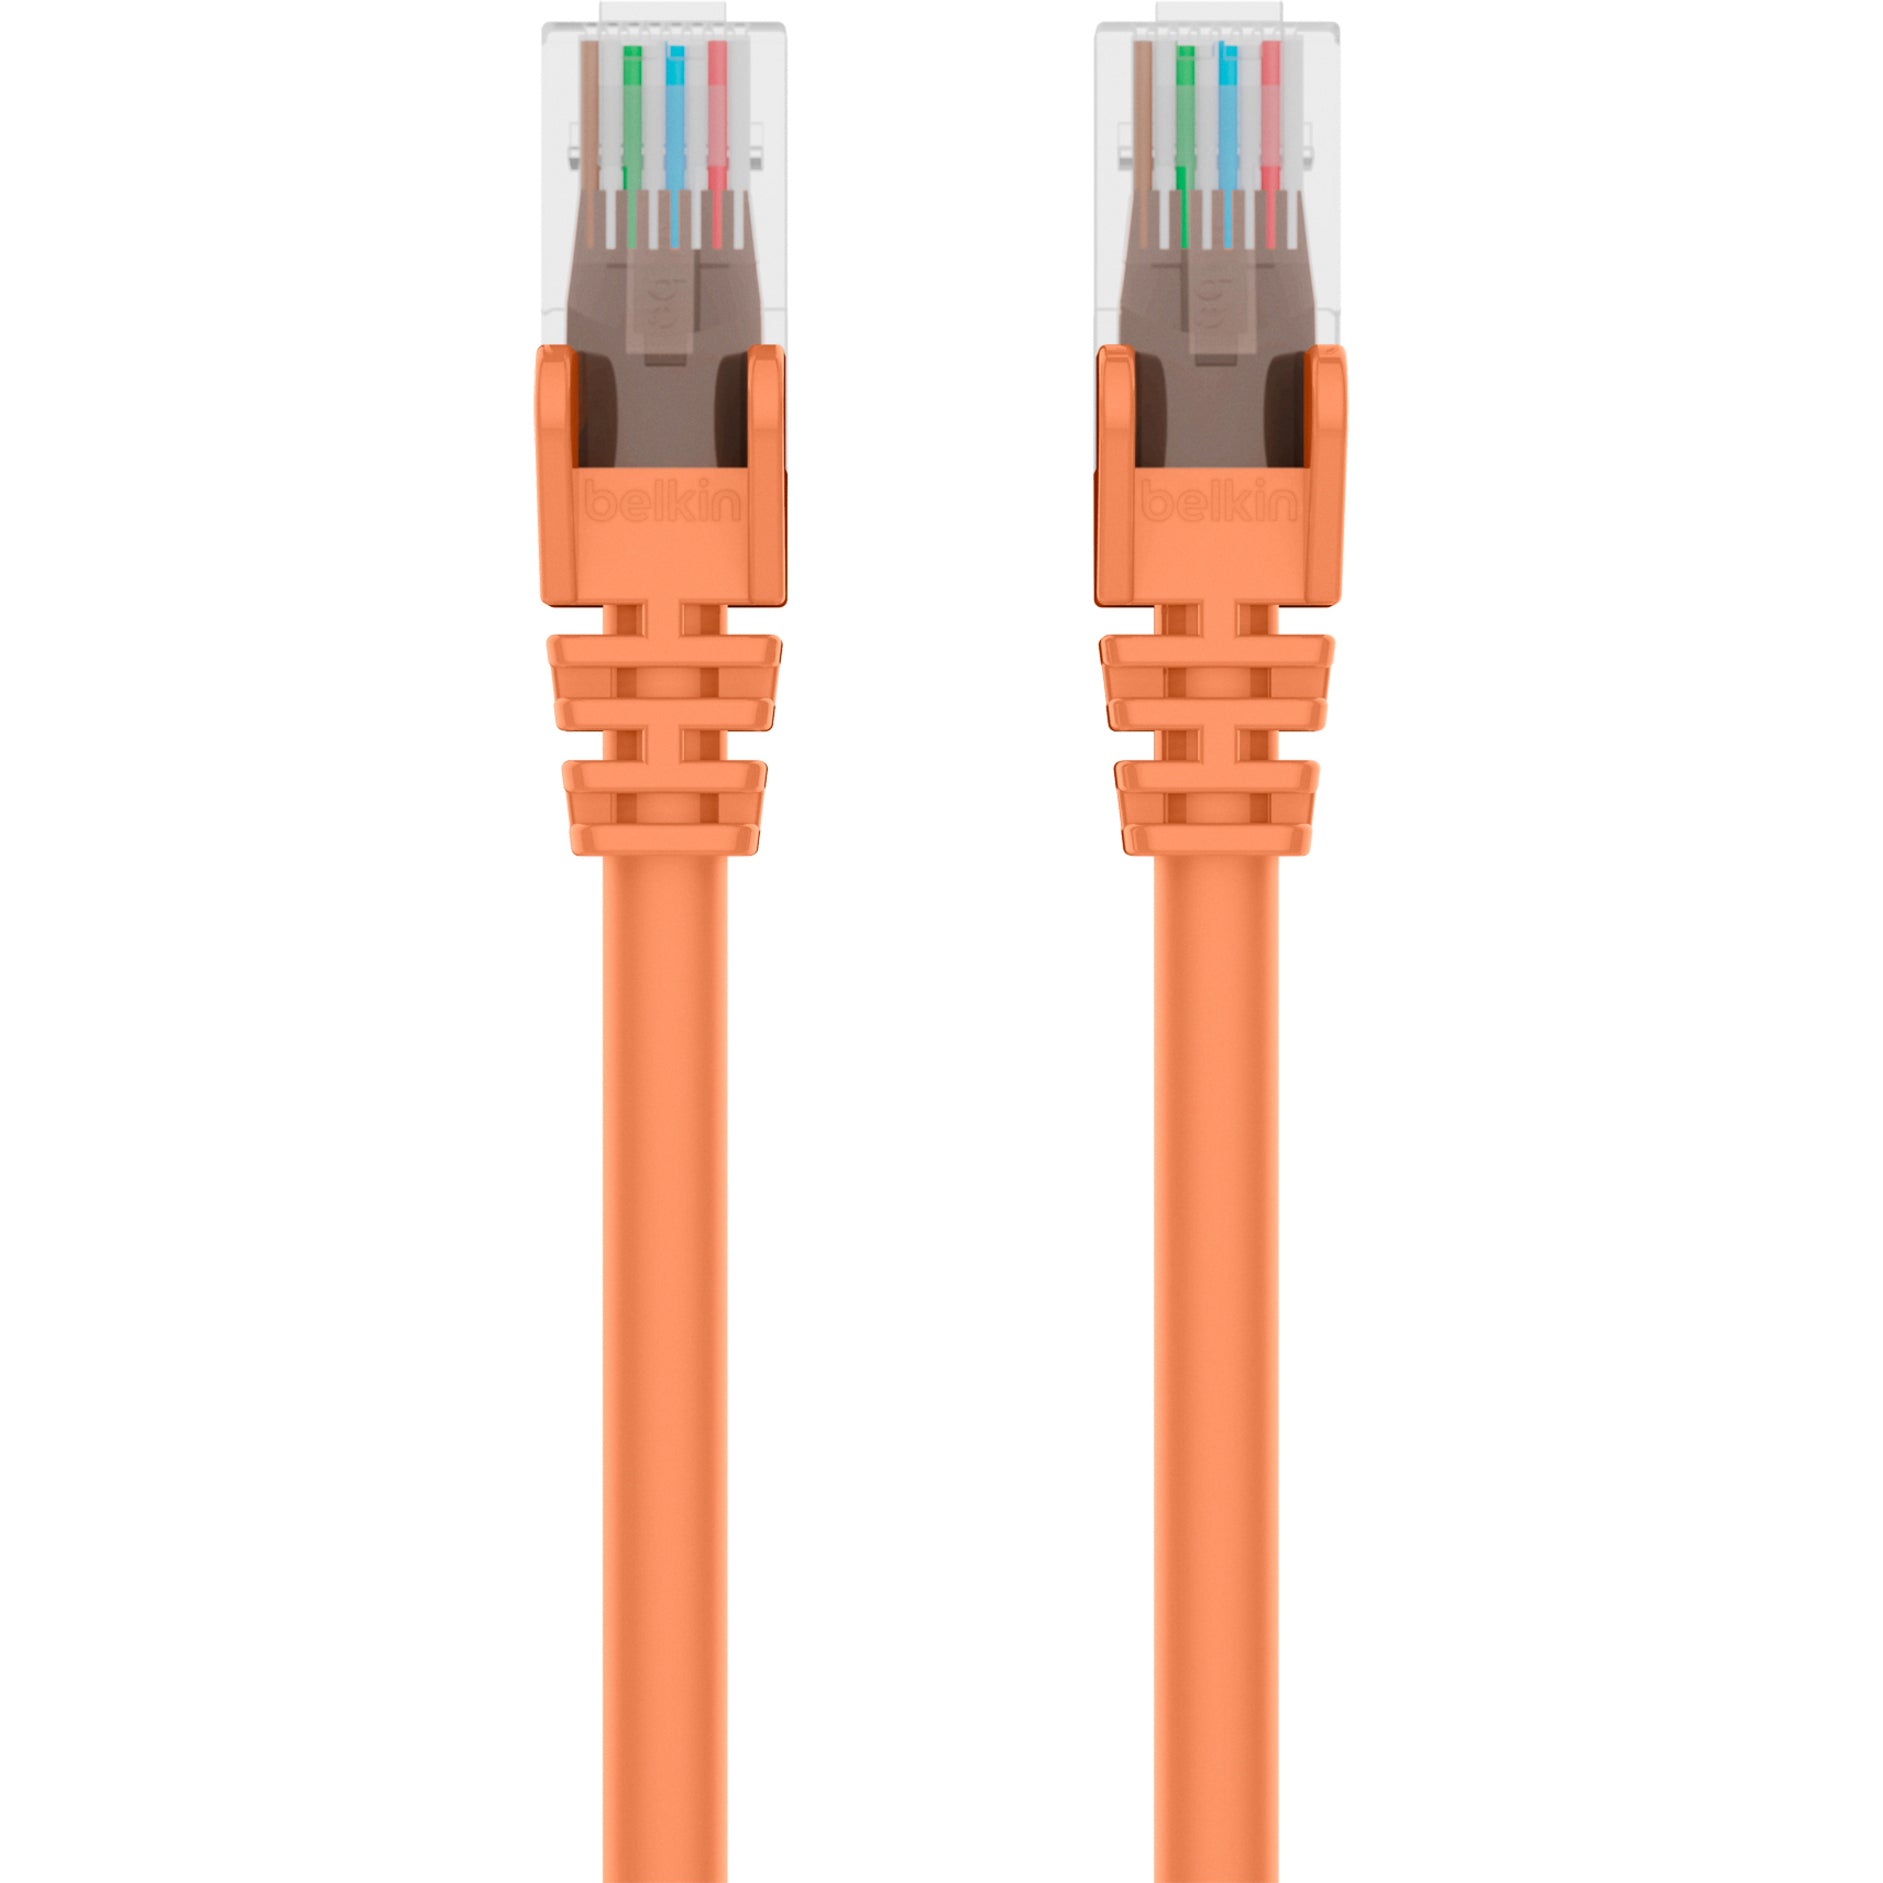 Belkin A3L791-10-ORG-S Cat5e Patch Cable, 10 ft, Premium Snagless Moldings